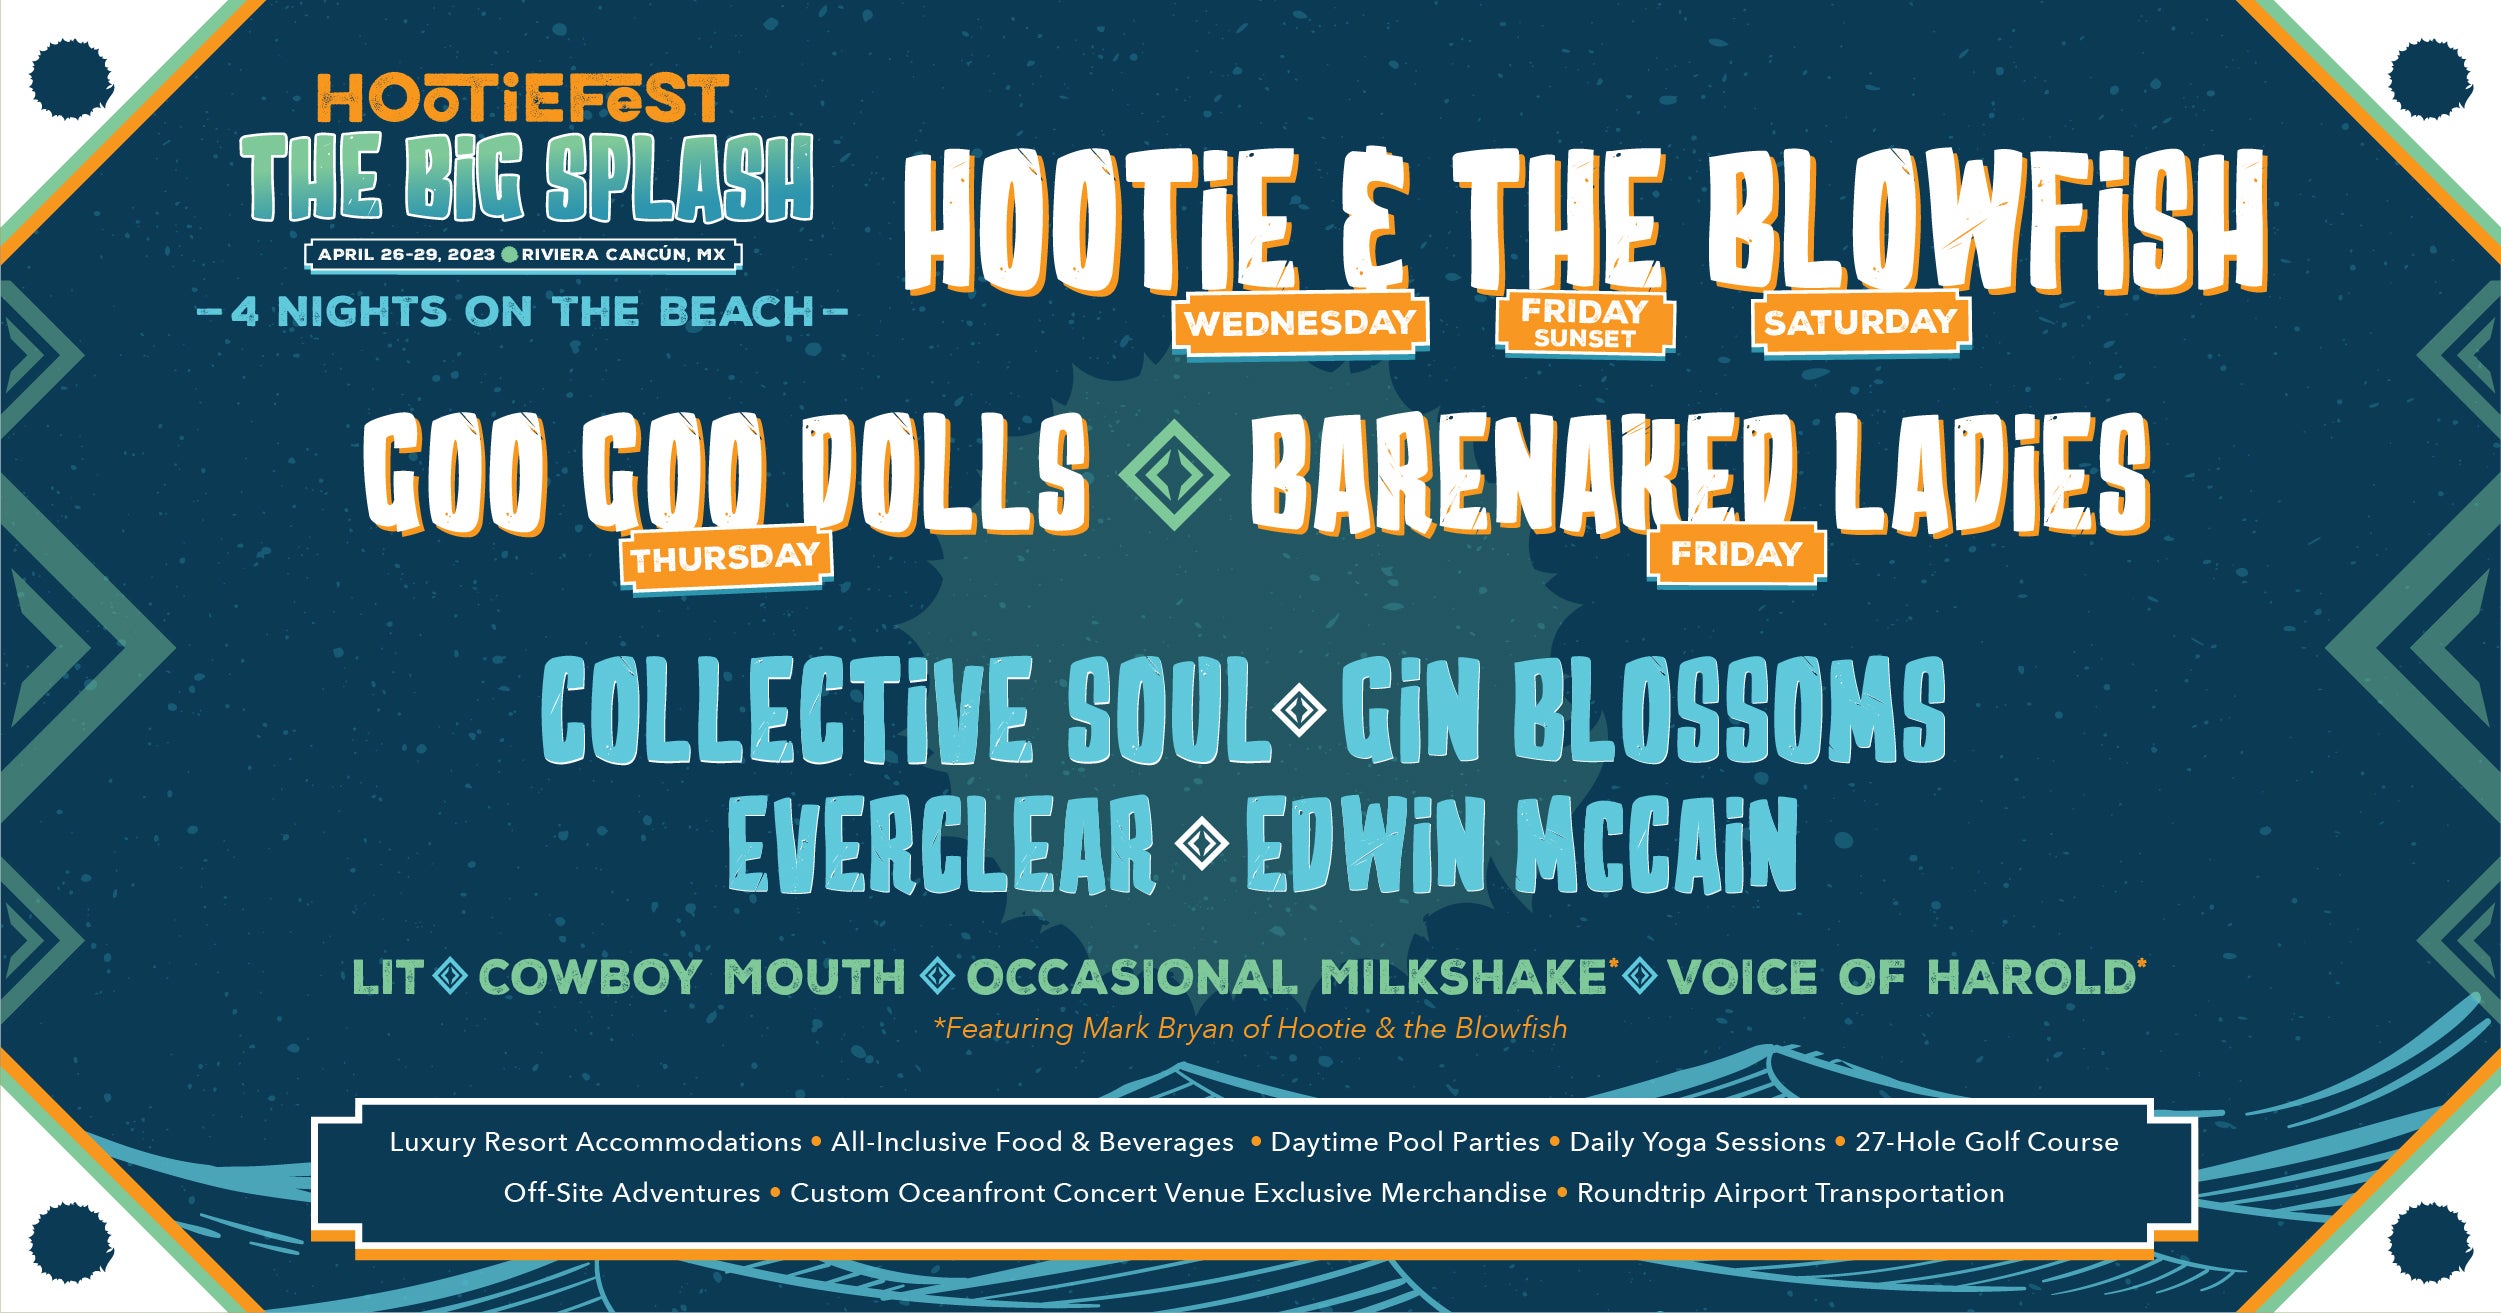 Hootie & the Blowfish, Goo Goo Dolls, Barenaked Ladies, Collective Soul, Gin Blossoms, Everclear, Edwin McCain